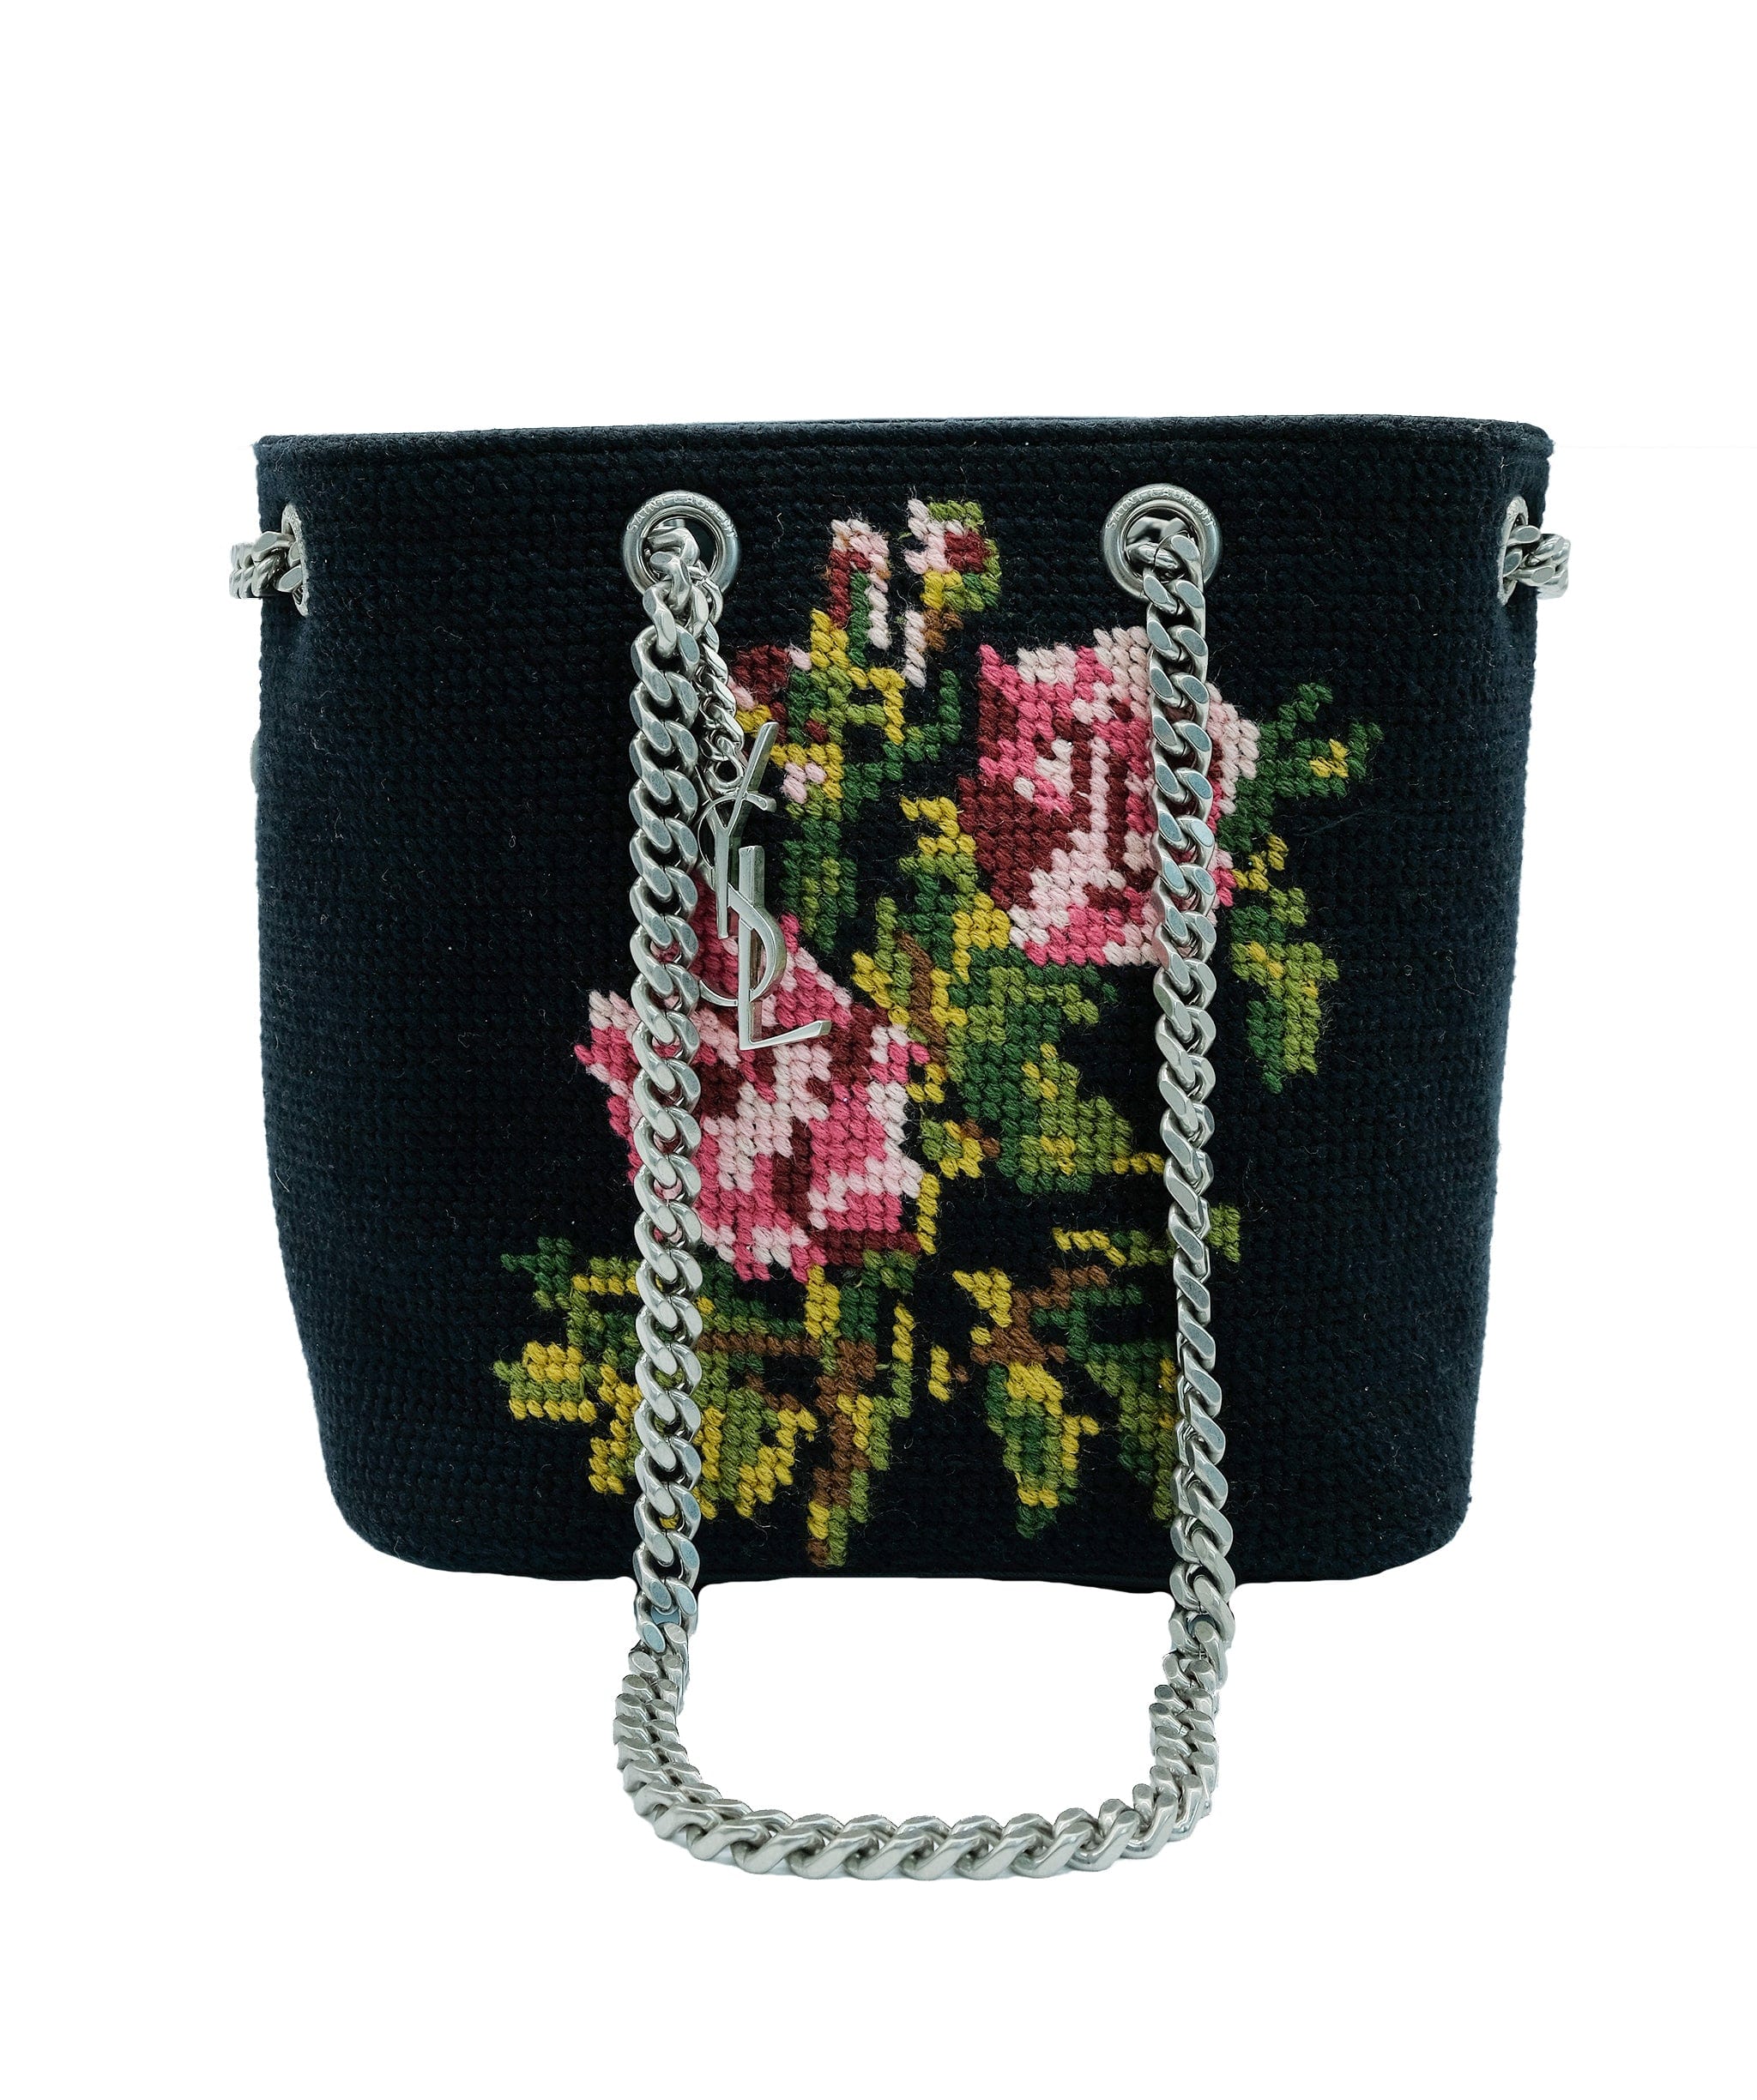 Yves Saint Laurent embroidery cardcase